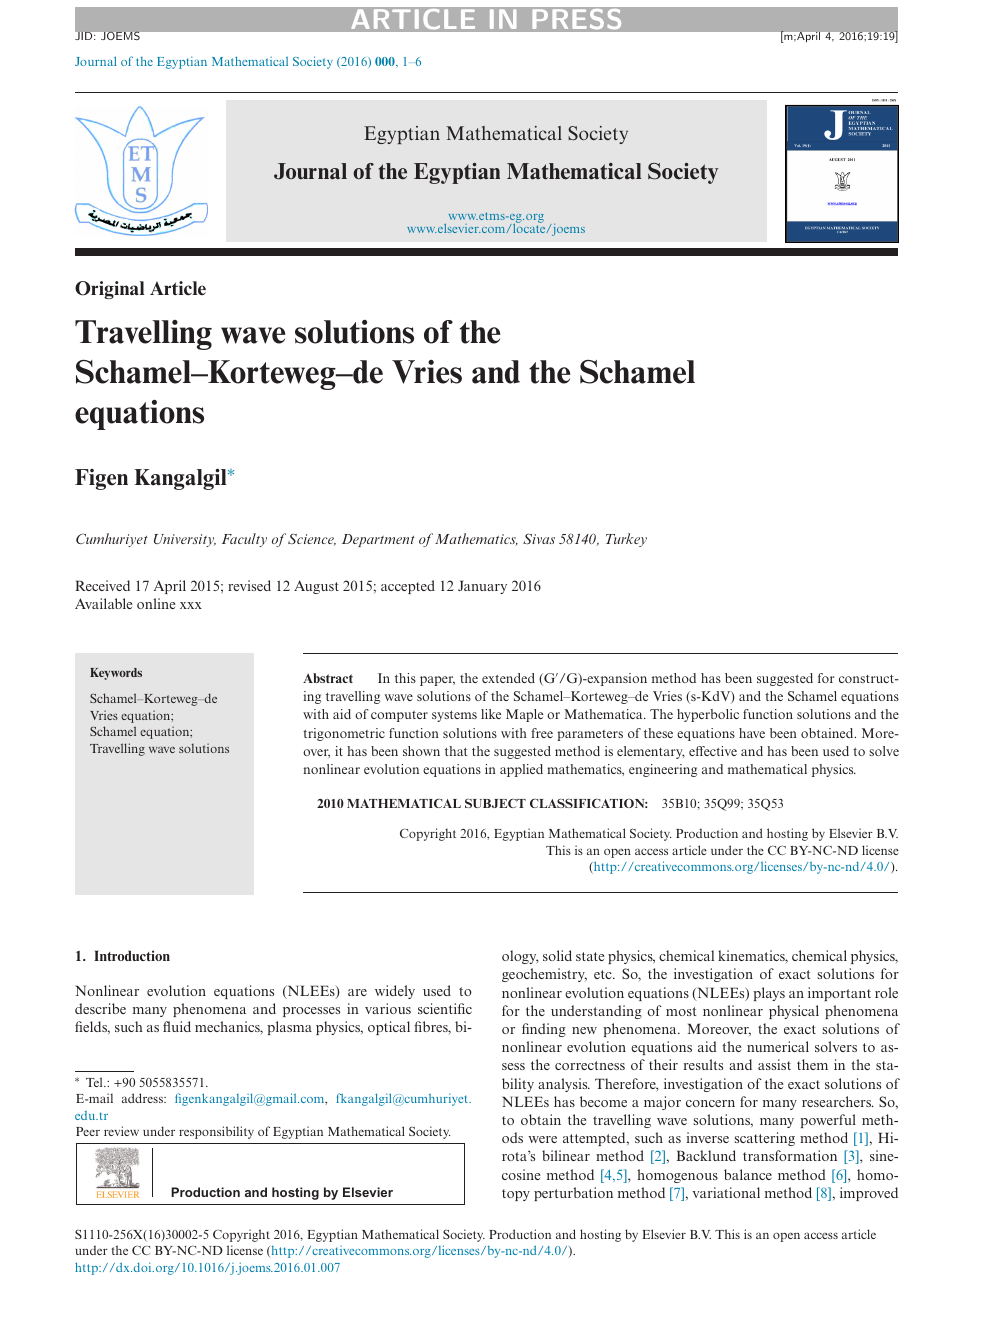 Travelling Wave Solutions Of The Schamel Korteweg De Vries And The Schamel Equations Topic Of Research Paper In Mathematics Download Scholarly Article Pdf And Read For Free On Cyberleninka Open Science Hub